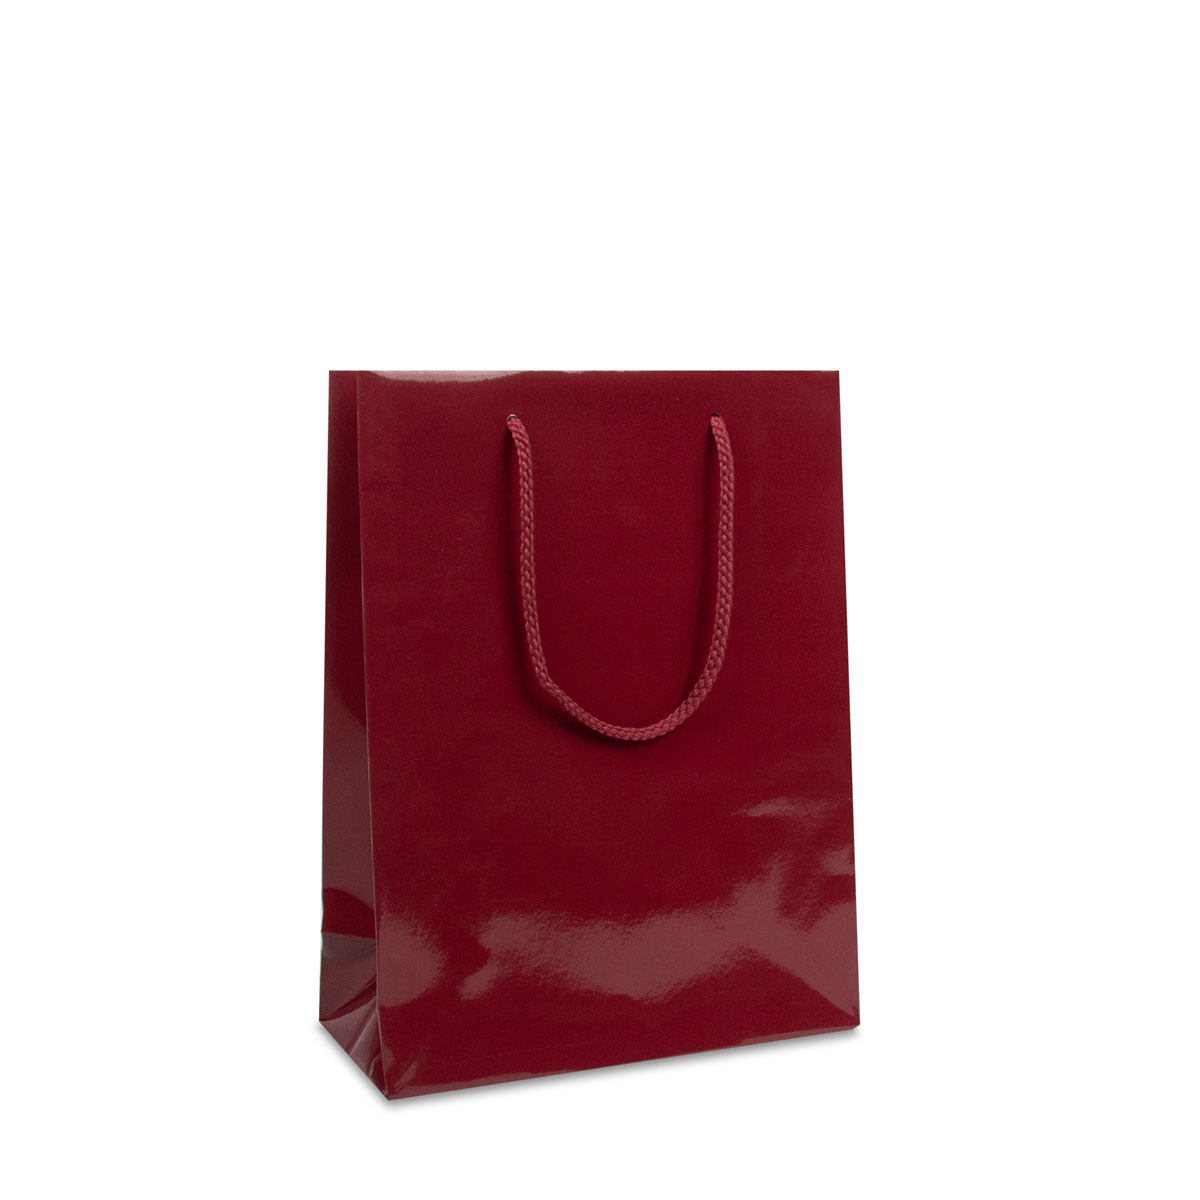 Luxury paper bags - Glossy 